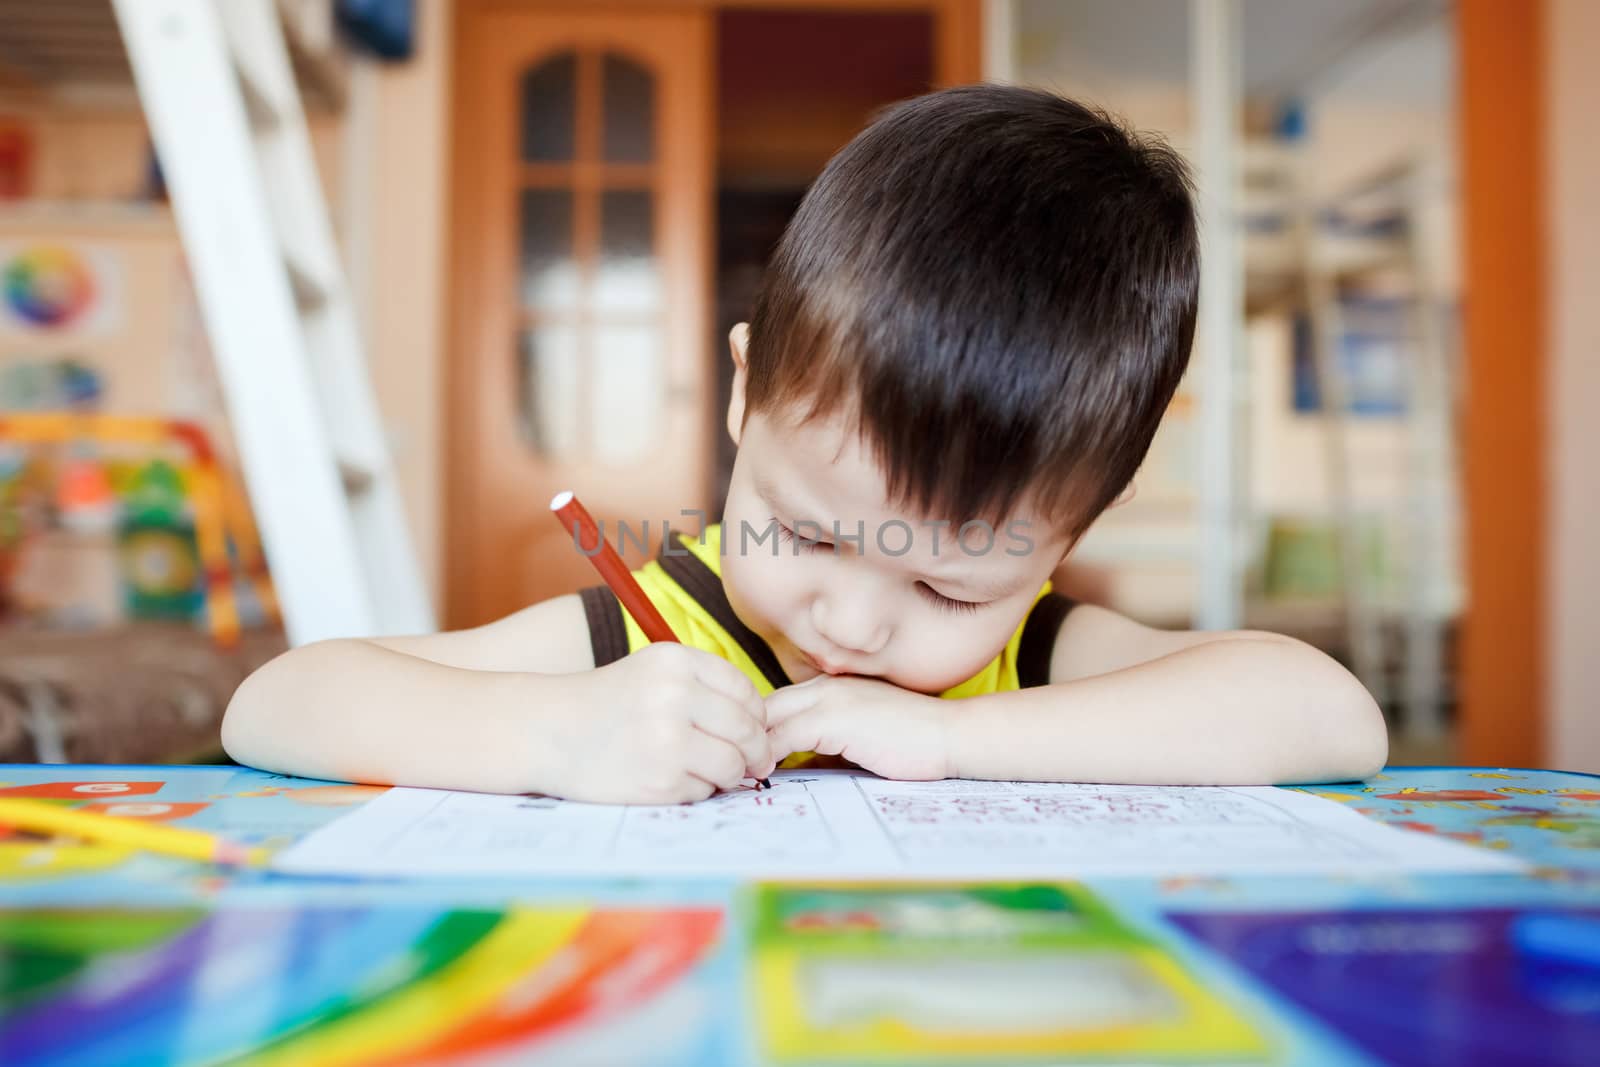 Busy little boy drawing using felt pens at home with colorful interior. by Maynagashev